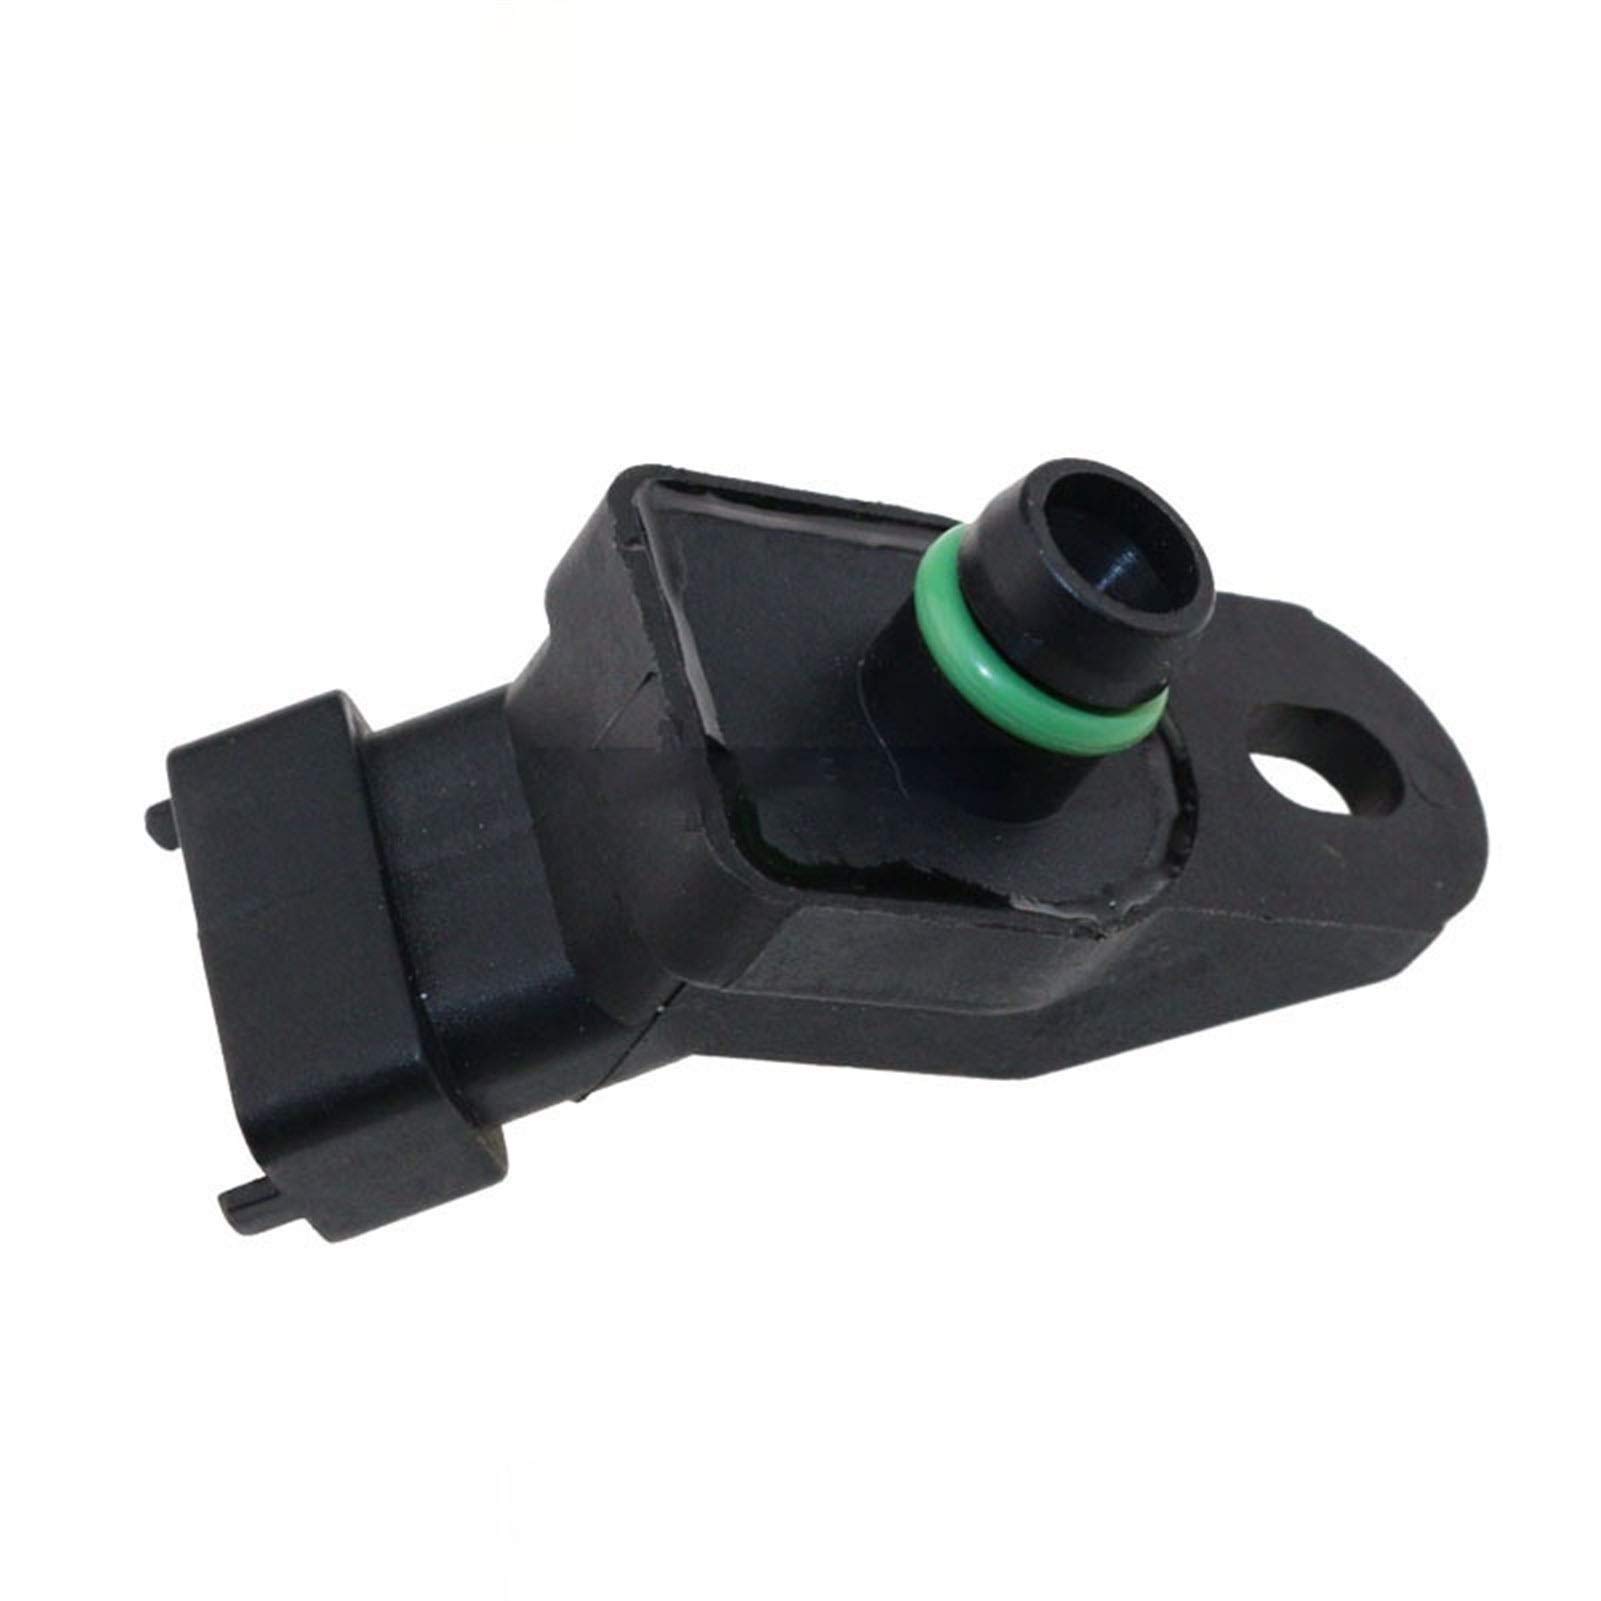 XIOSOIAHOU Sensor MAP Sensor passend for Opel Fit for Opel Astra G Omega for Vectra B Zafira Fit for Volvo S40 S60 S80 46433053 90541409 0281002137 9125462 8699449 von XIOSOIAHOU